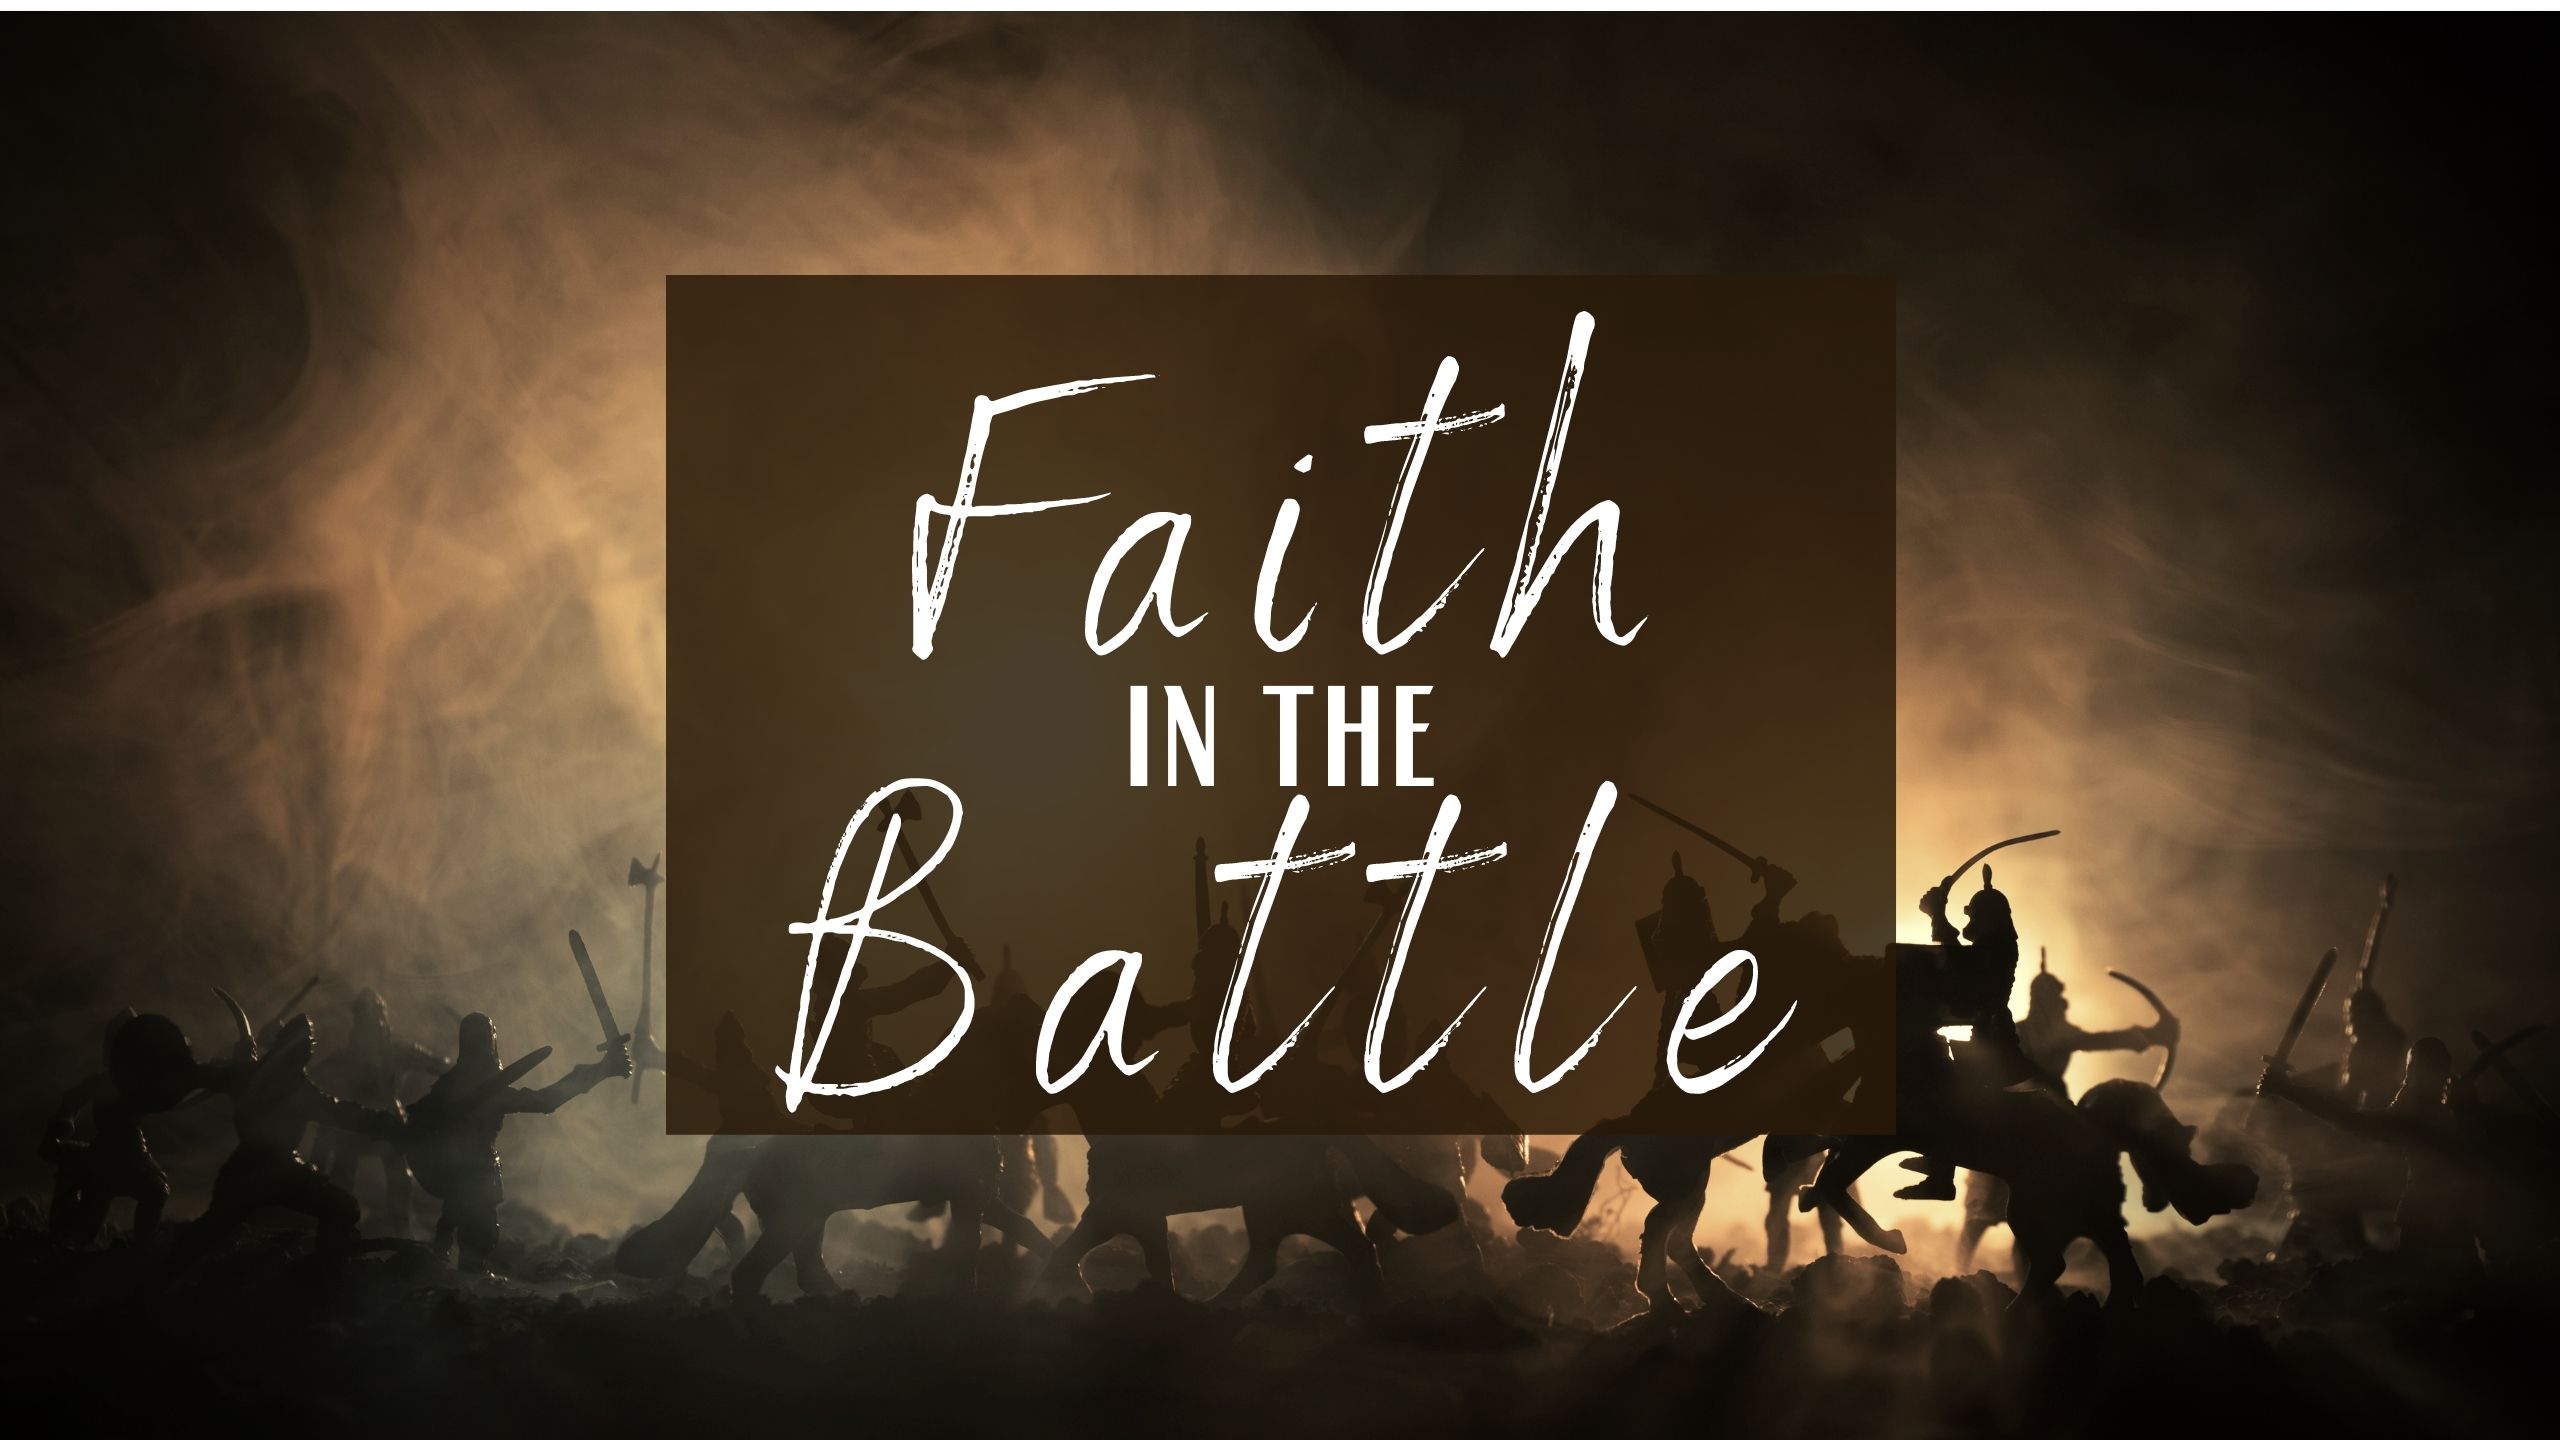 download battle brothers of flesh and faith for free